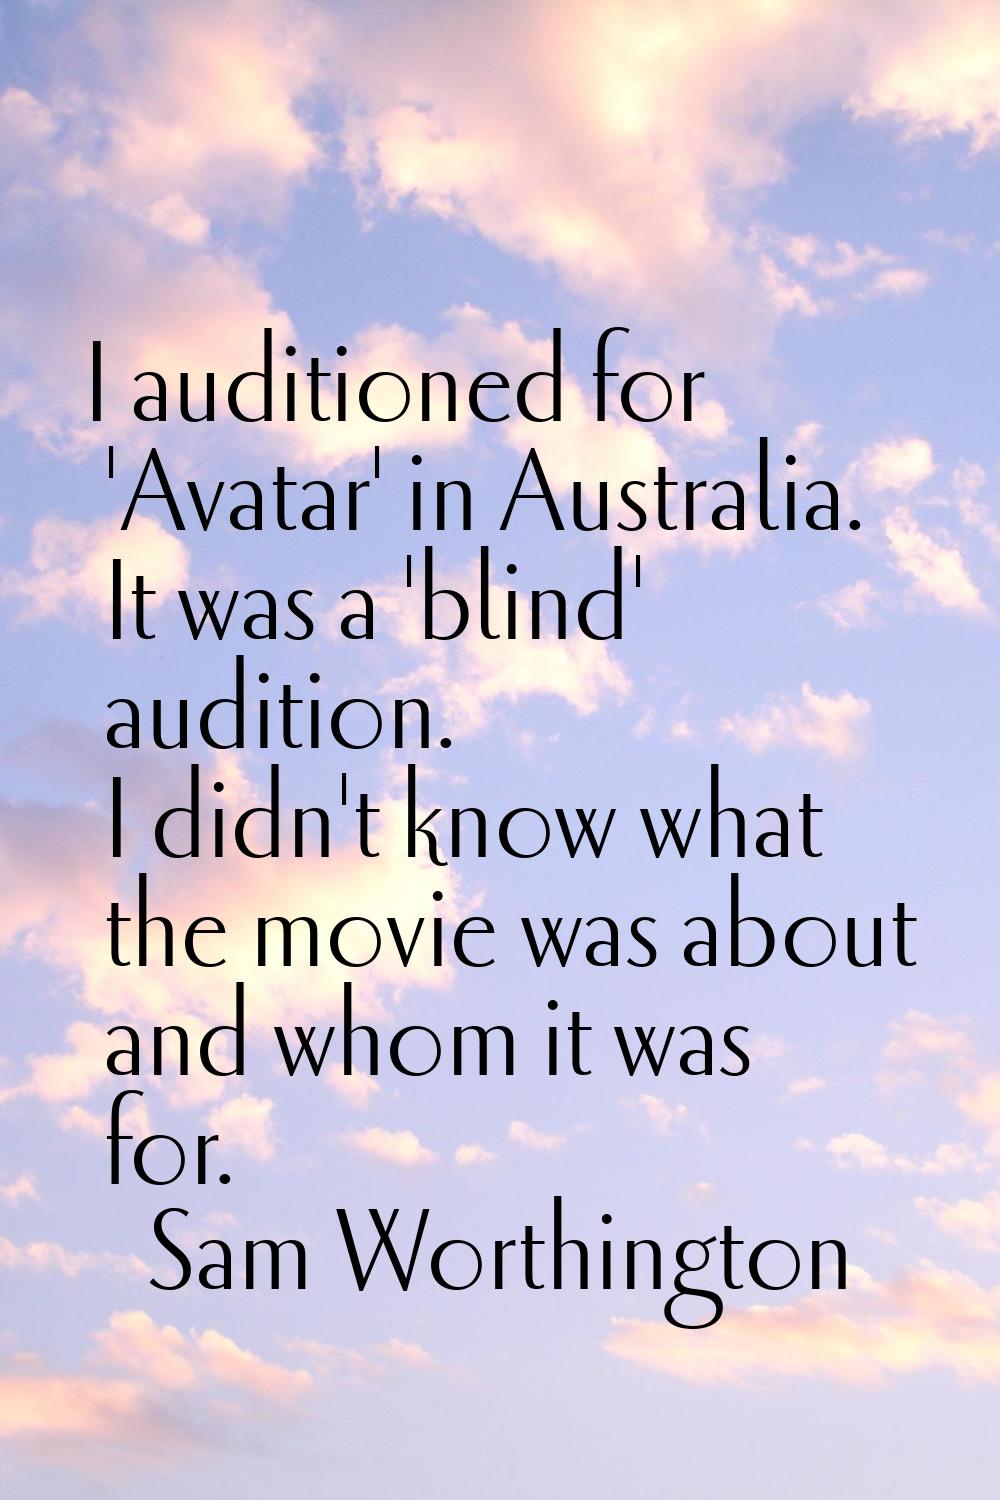 I auditioned for 'Avatar' in Australia. It was a 'blind' audition. I didn't know what the movie was